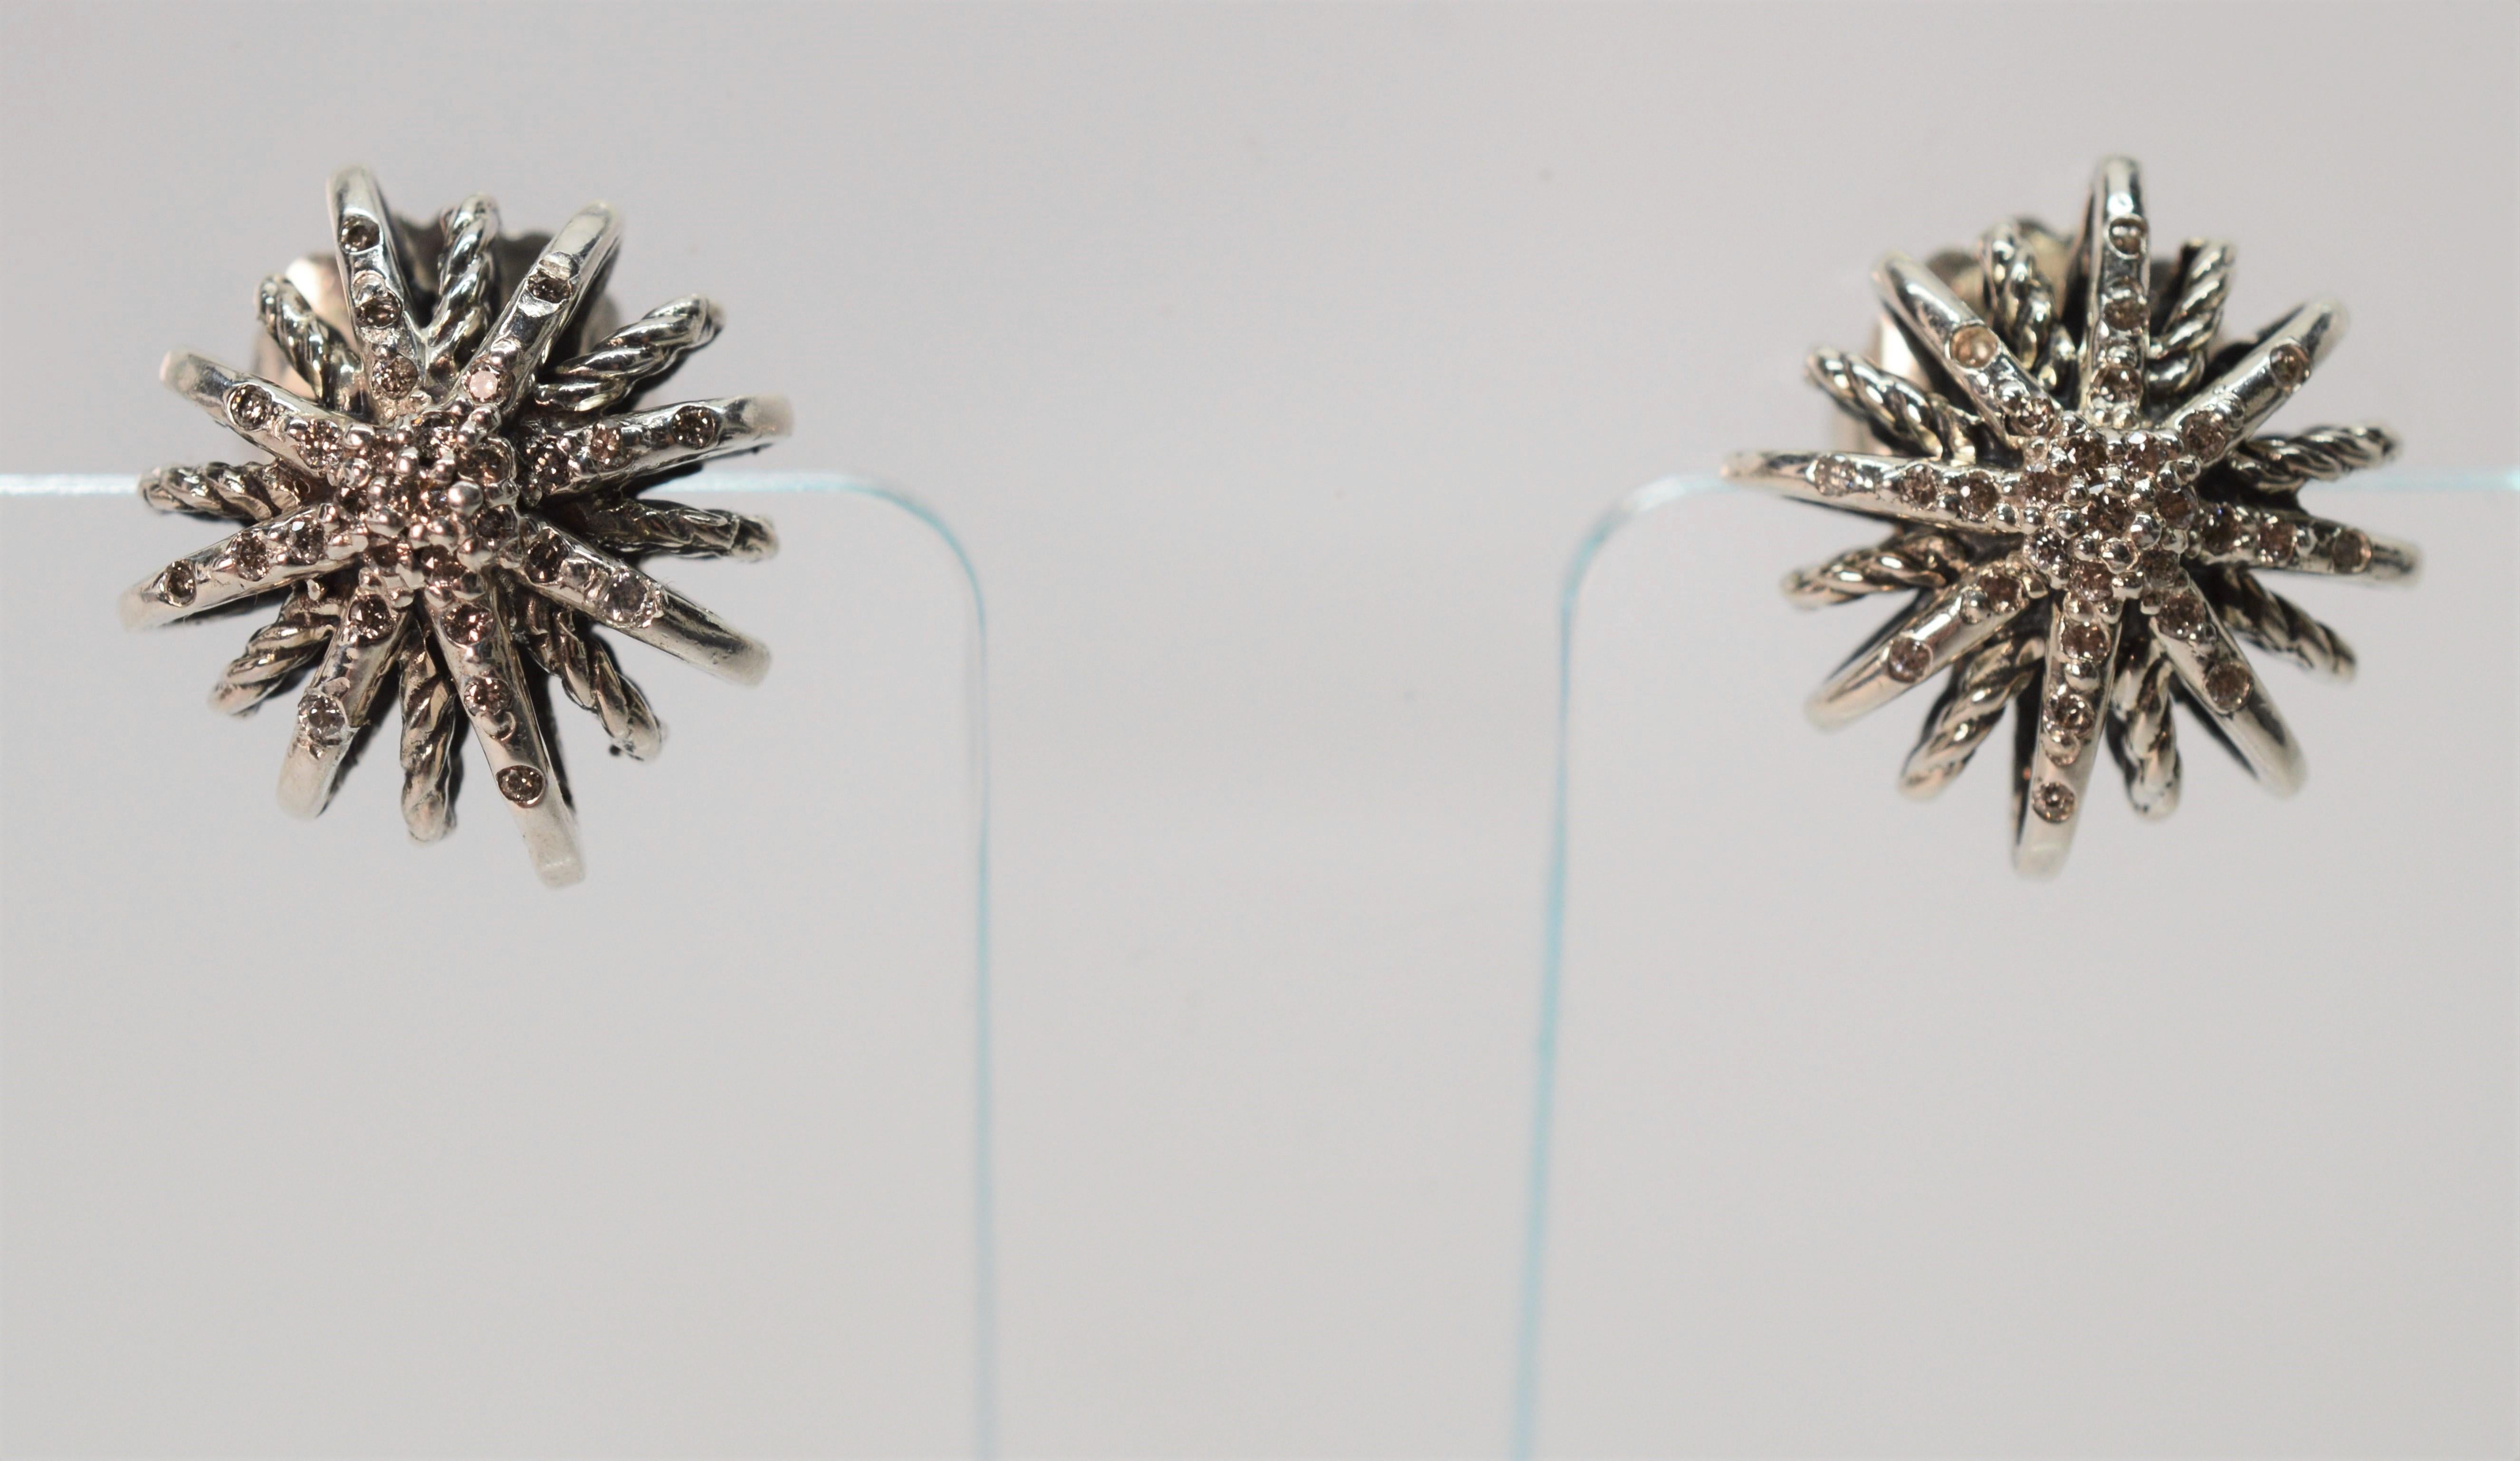 Said to be inspired by designer David Yurman's experience viewing fireworks in the Paris night sky, these popular 16mm bright starburst earring studs are the perfect accent to illuminate your look. Crafted In sterling silver, the earring pair is